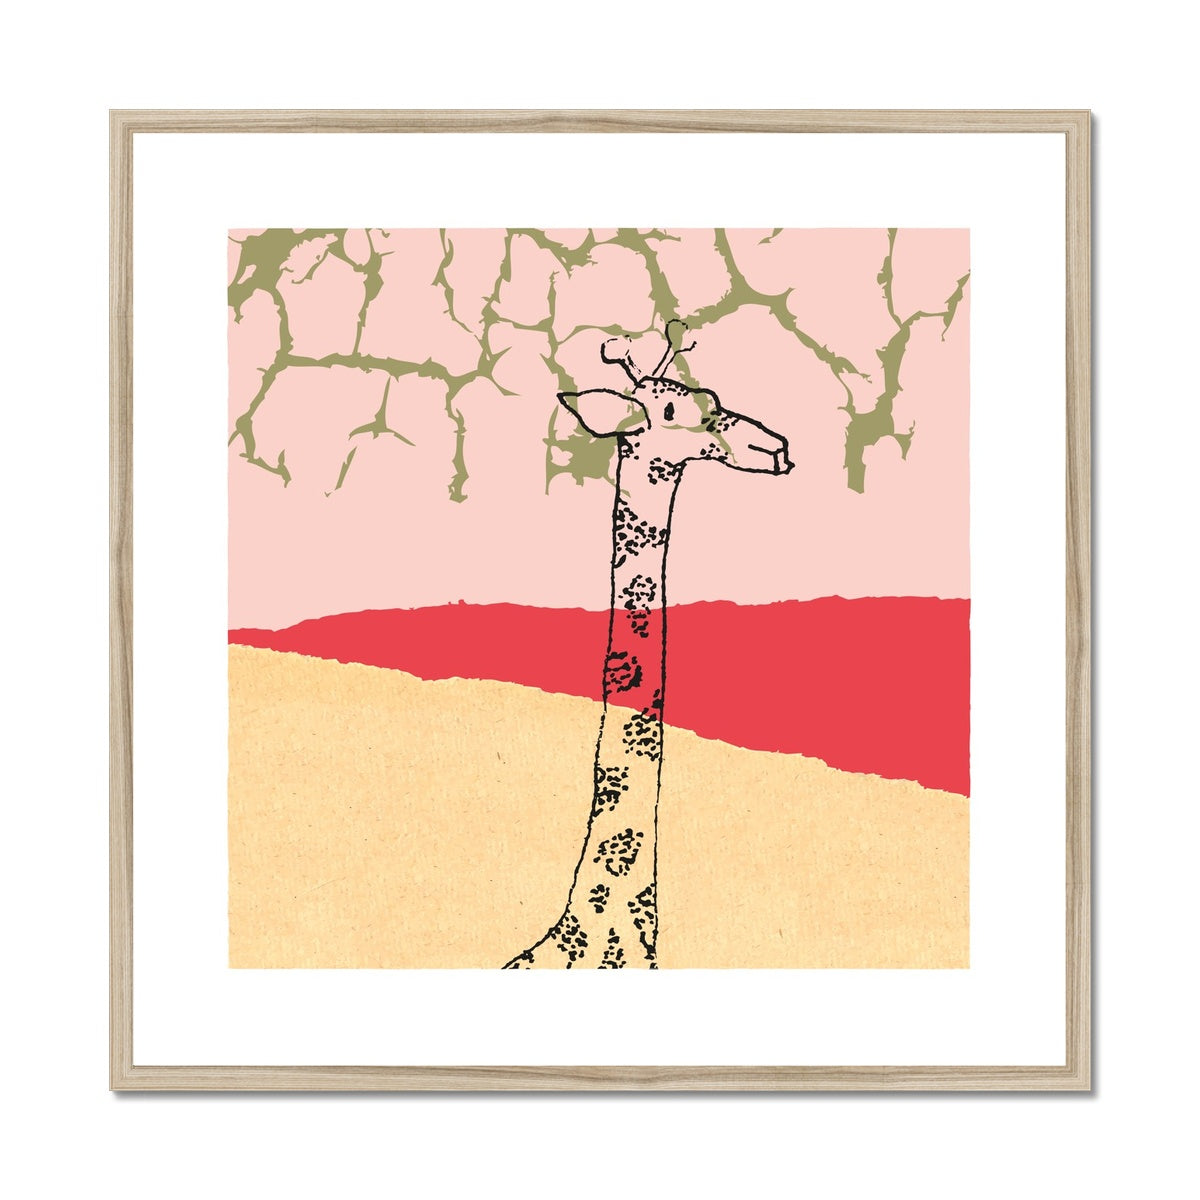 Art print of giraffe neck and head in black in a pale yellow and red landscape with light pink sky and golden branches reaching from above in a natural wooden frame.